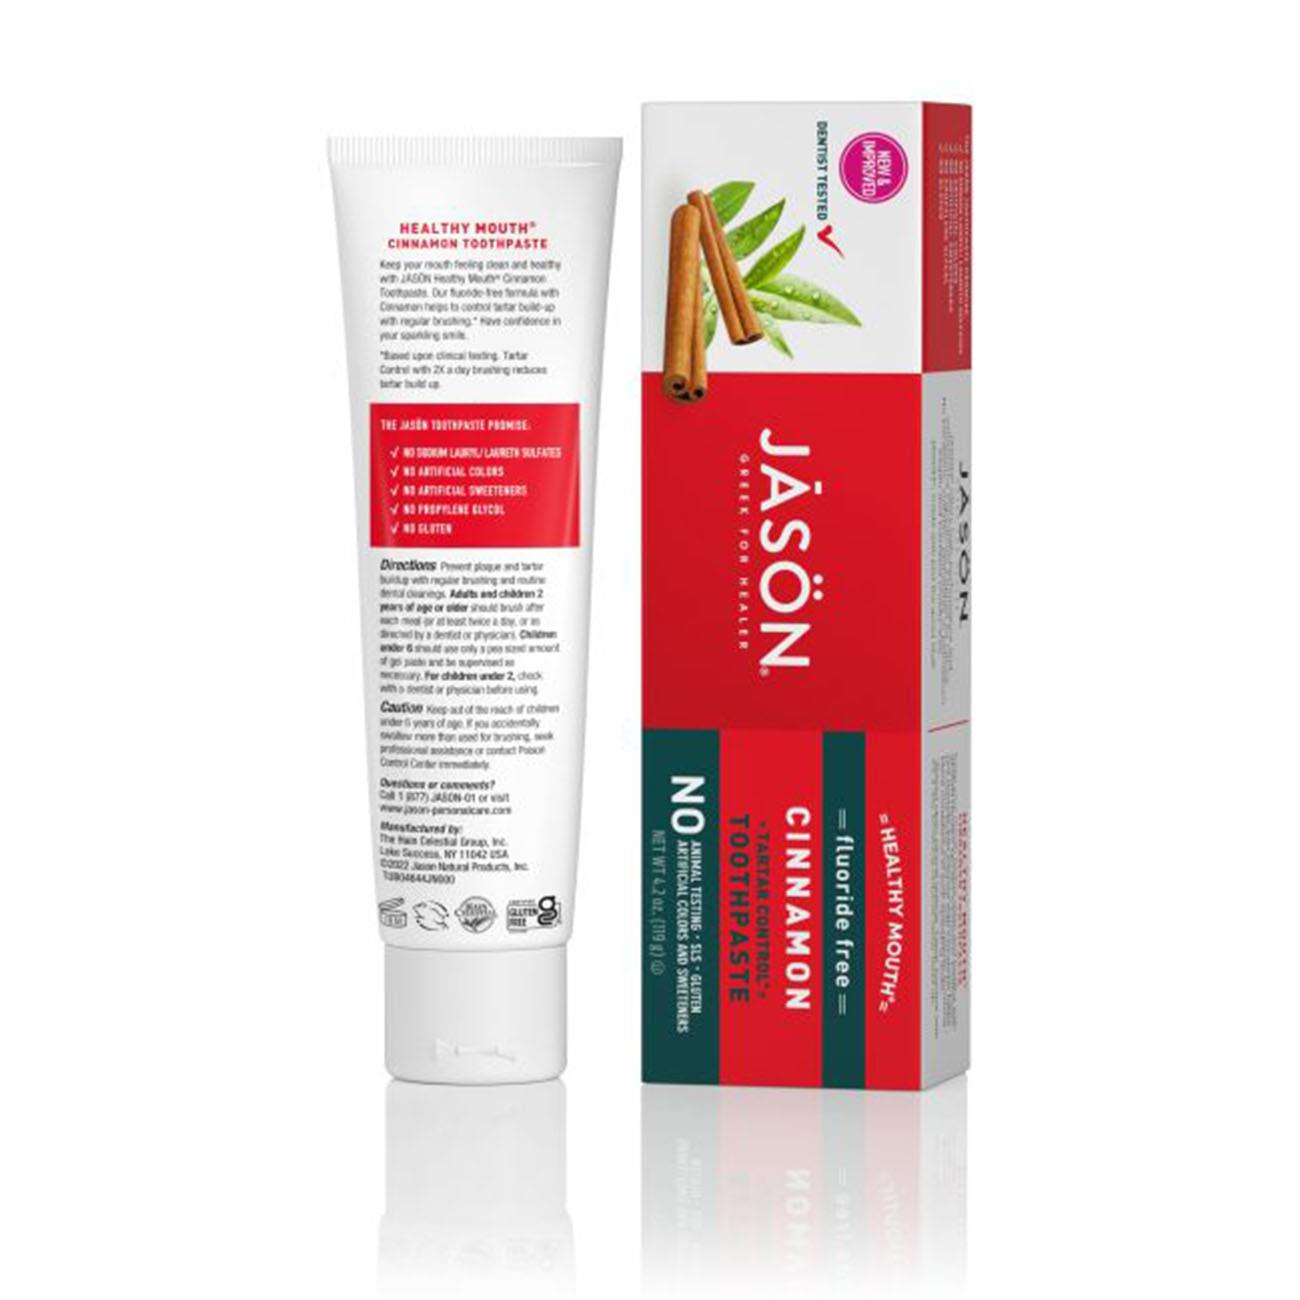 Healthy Mouth Tartar Control Toothpaste Cinnamon 119g